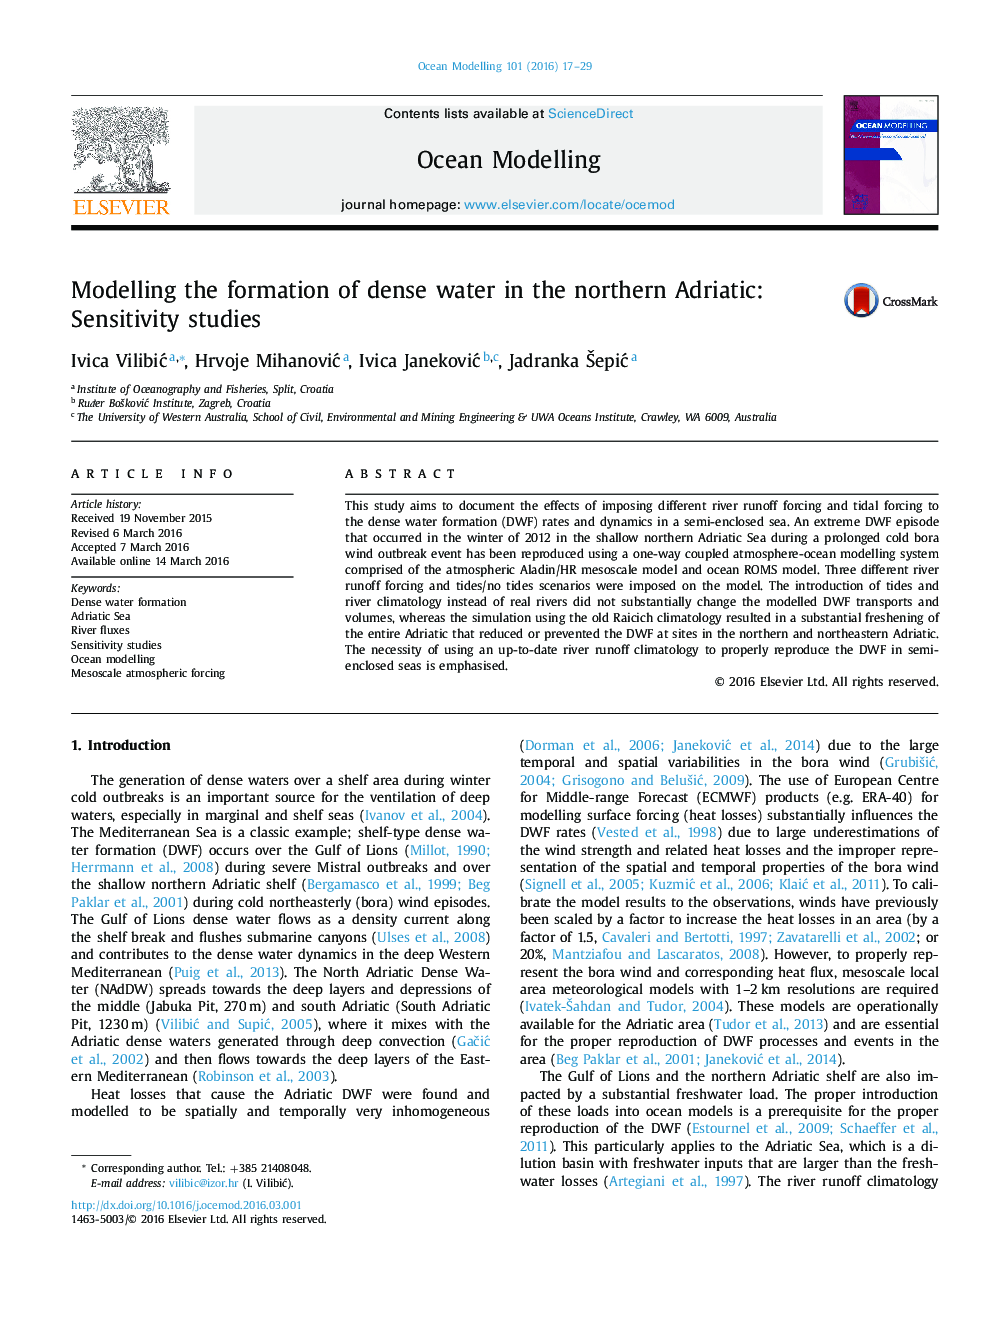 Modelling the formation of dense water in the northern Adriatic: Sensitivity studies